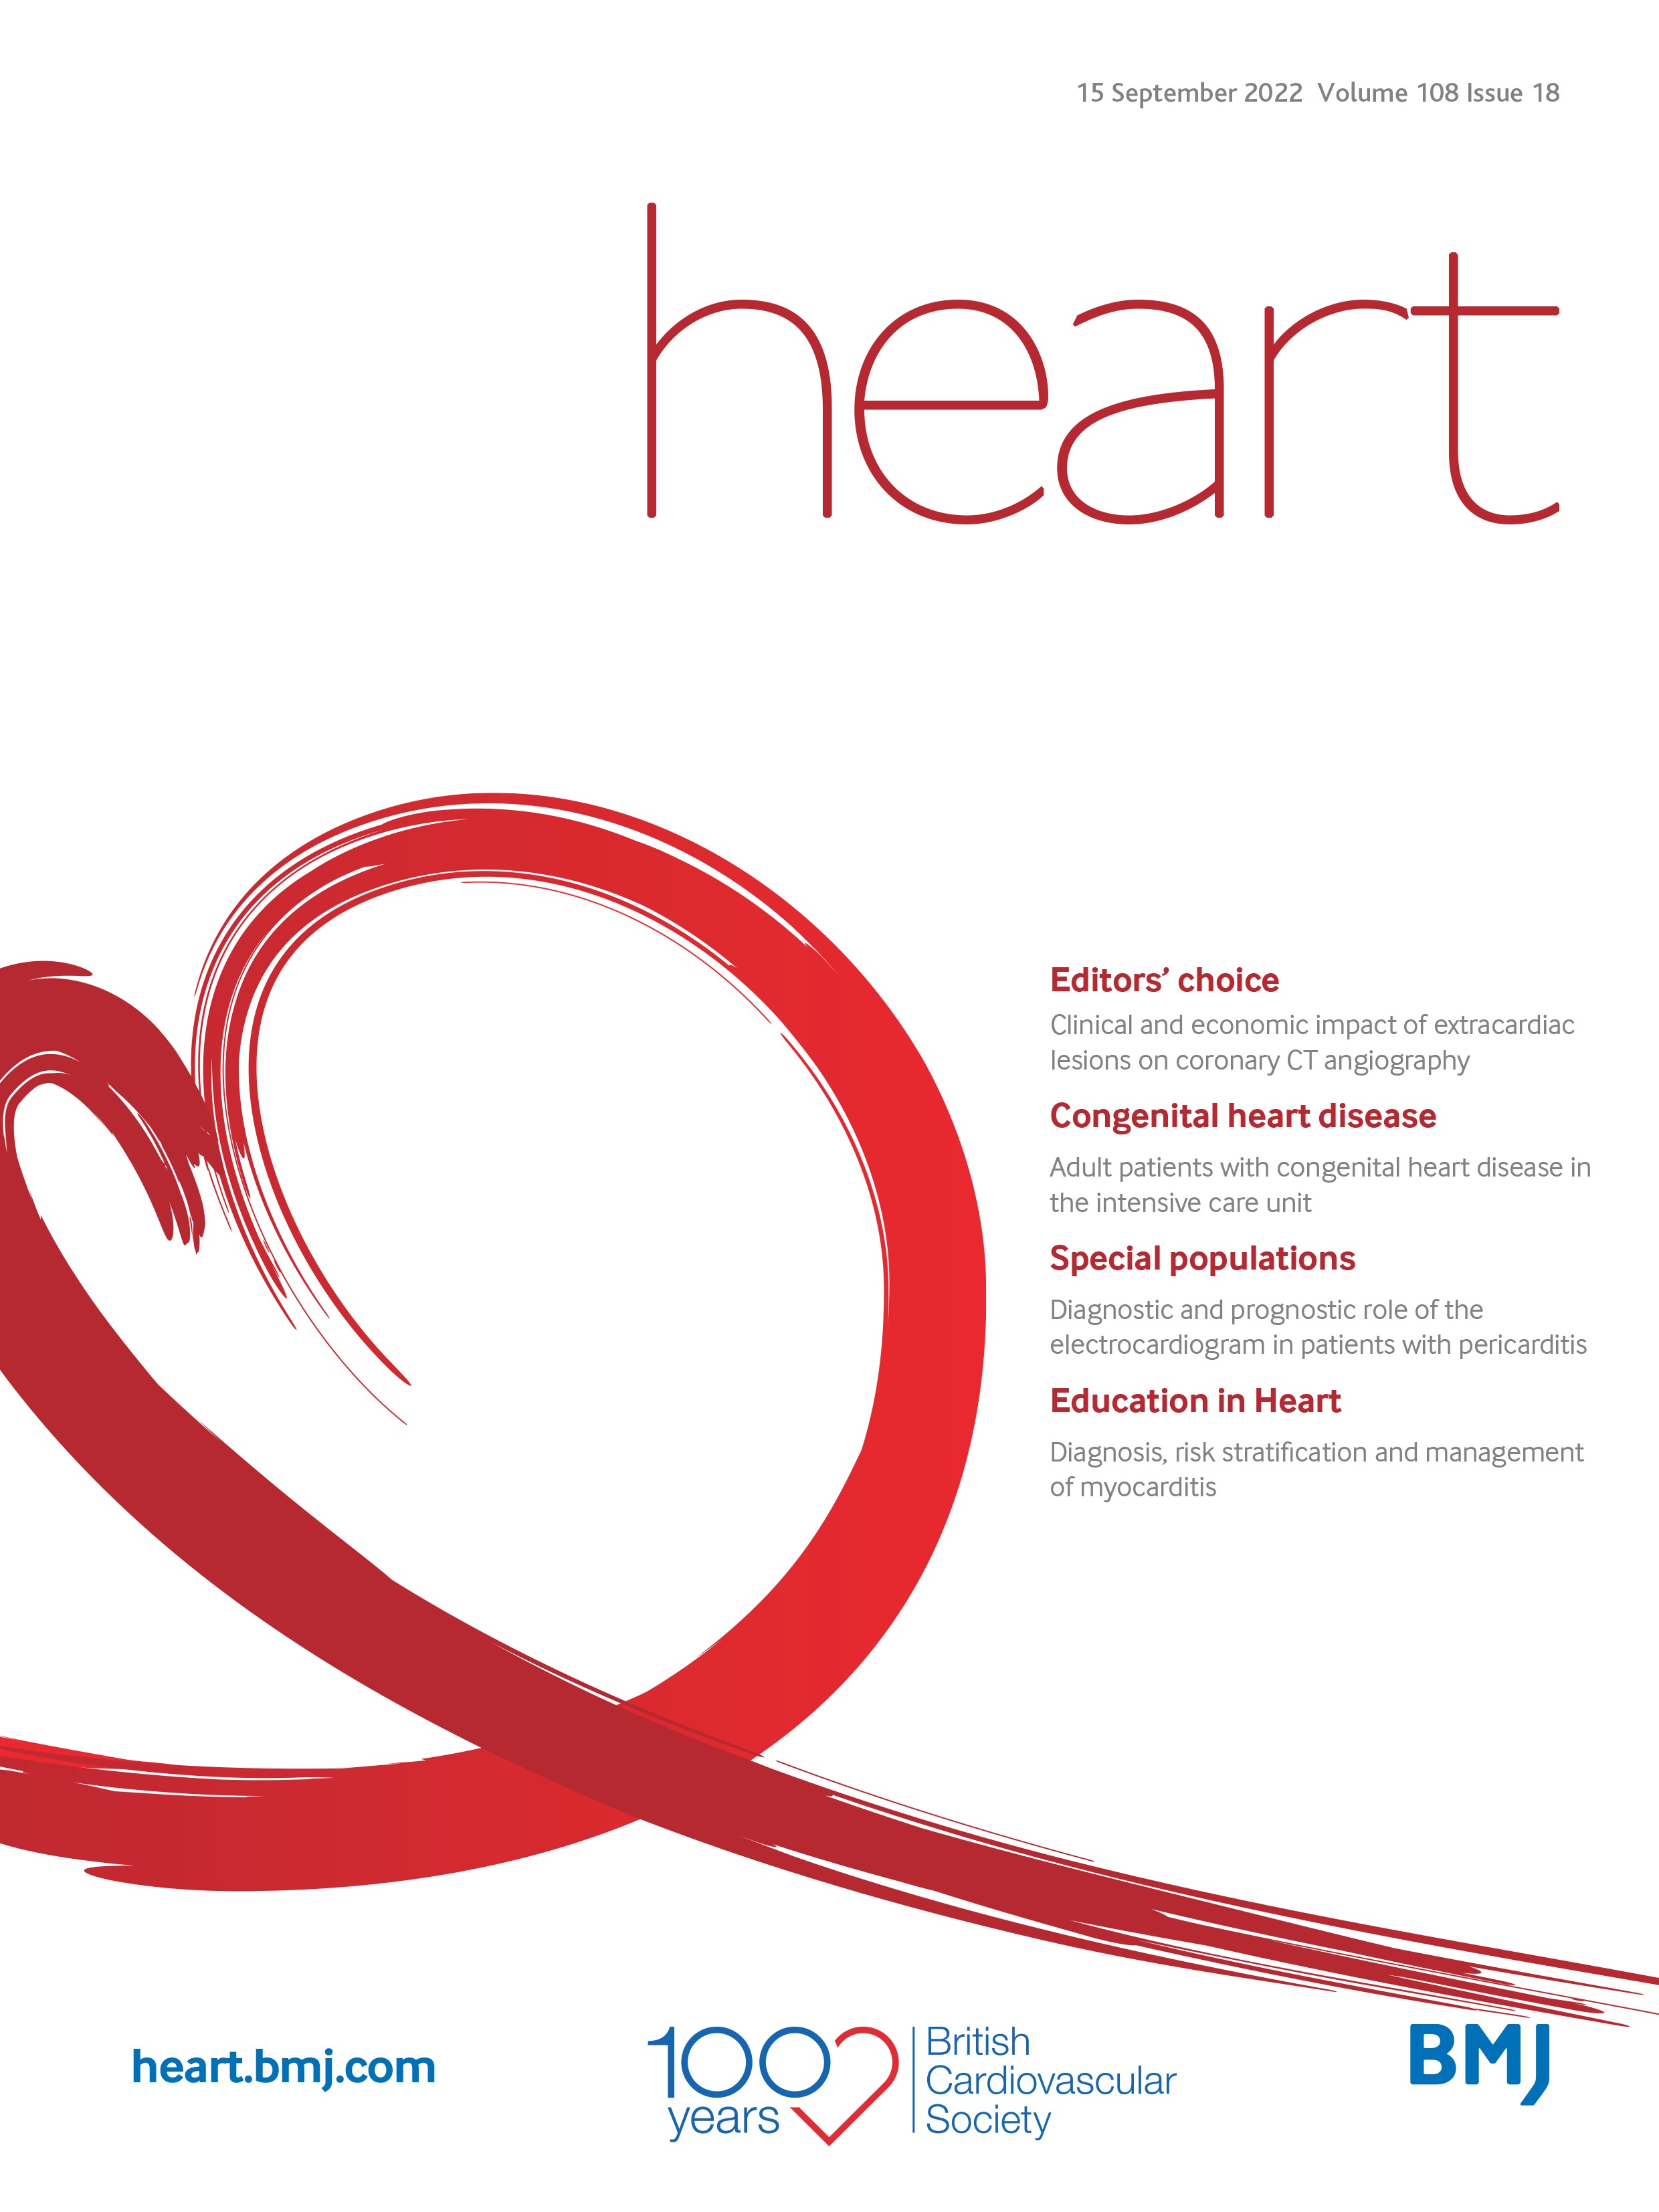 Thinking outside the box: clinical and economic implications of extracardiac findings on cardiac computed tomography angiography